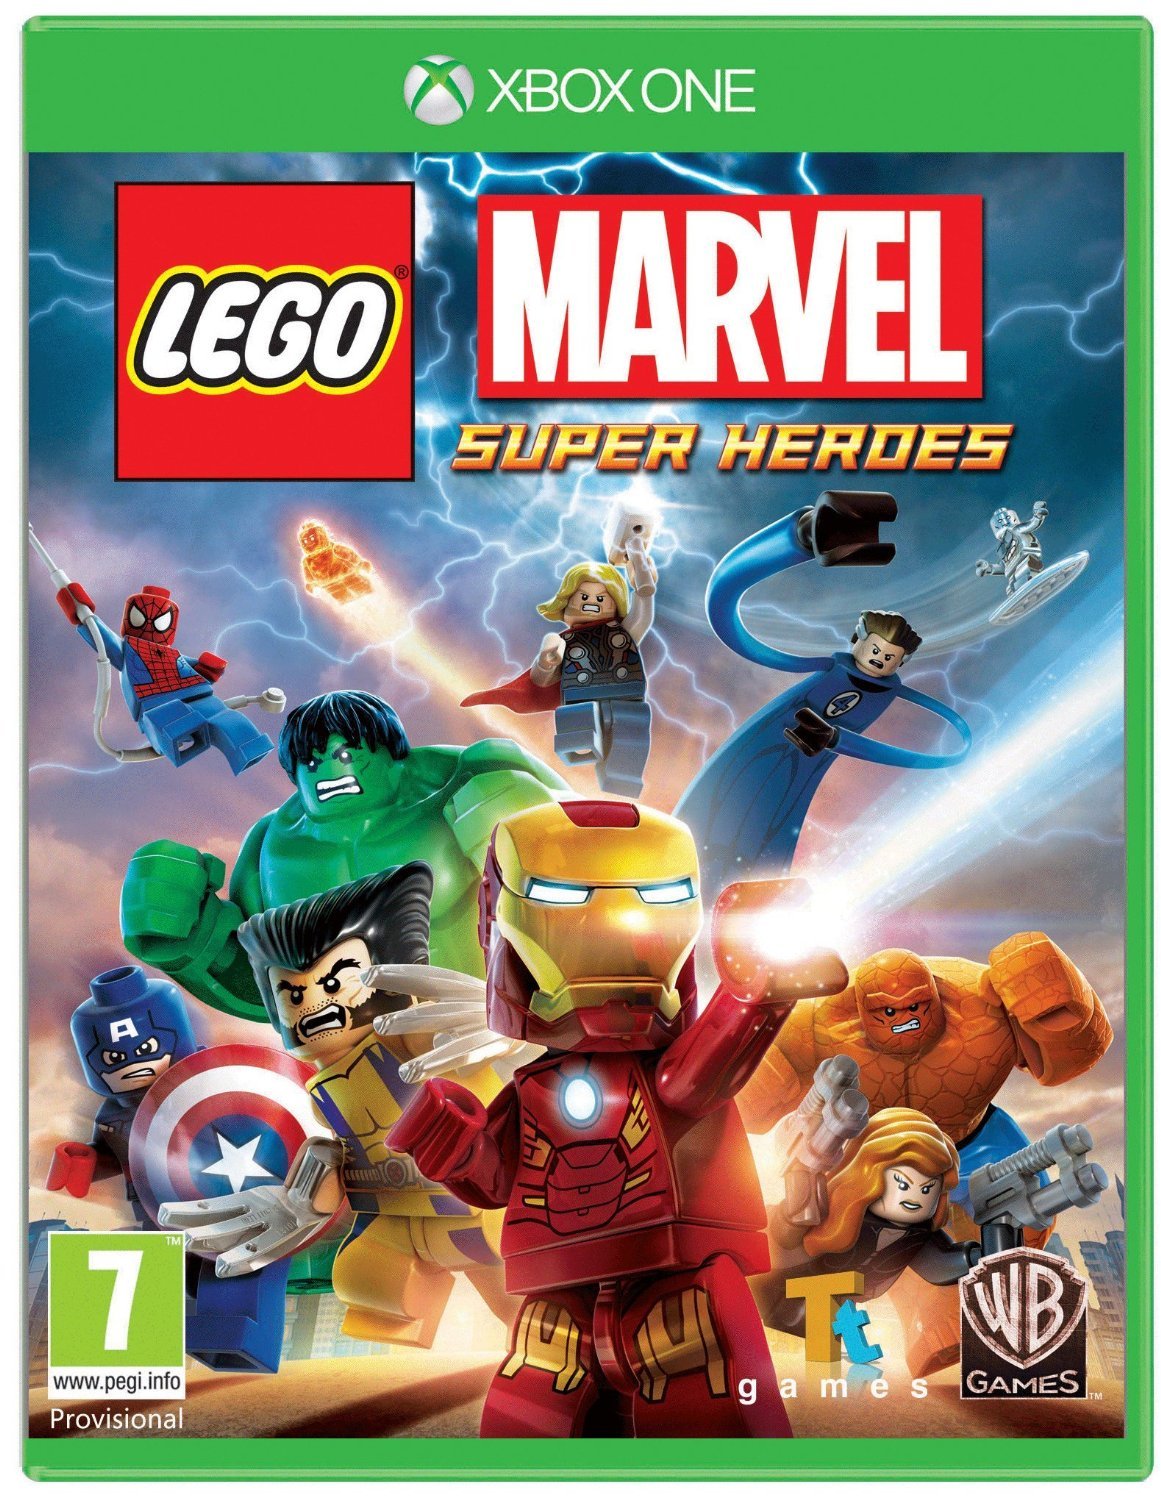 LEGO Marvel Super Heroes Video Game (Xbox One)